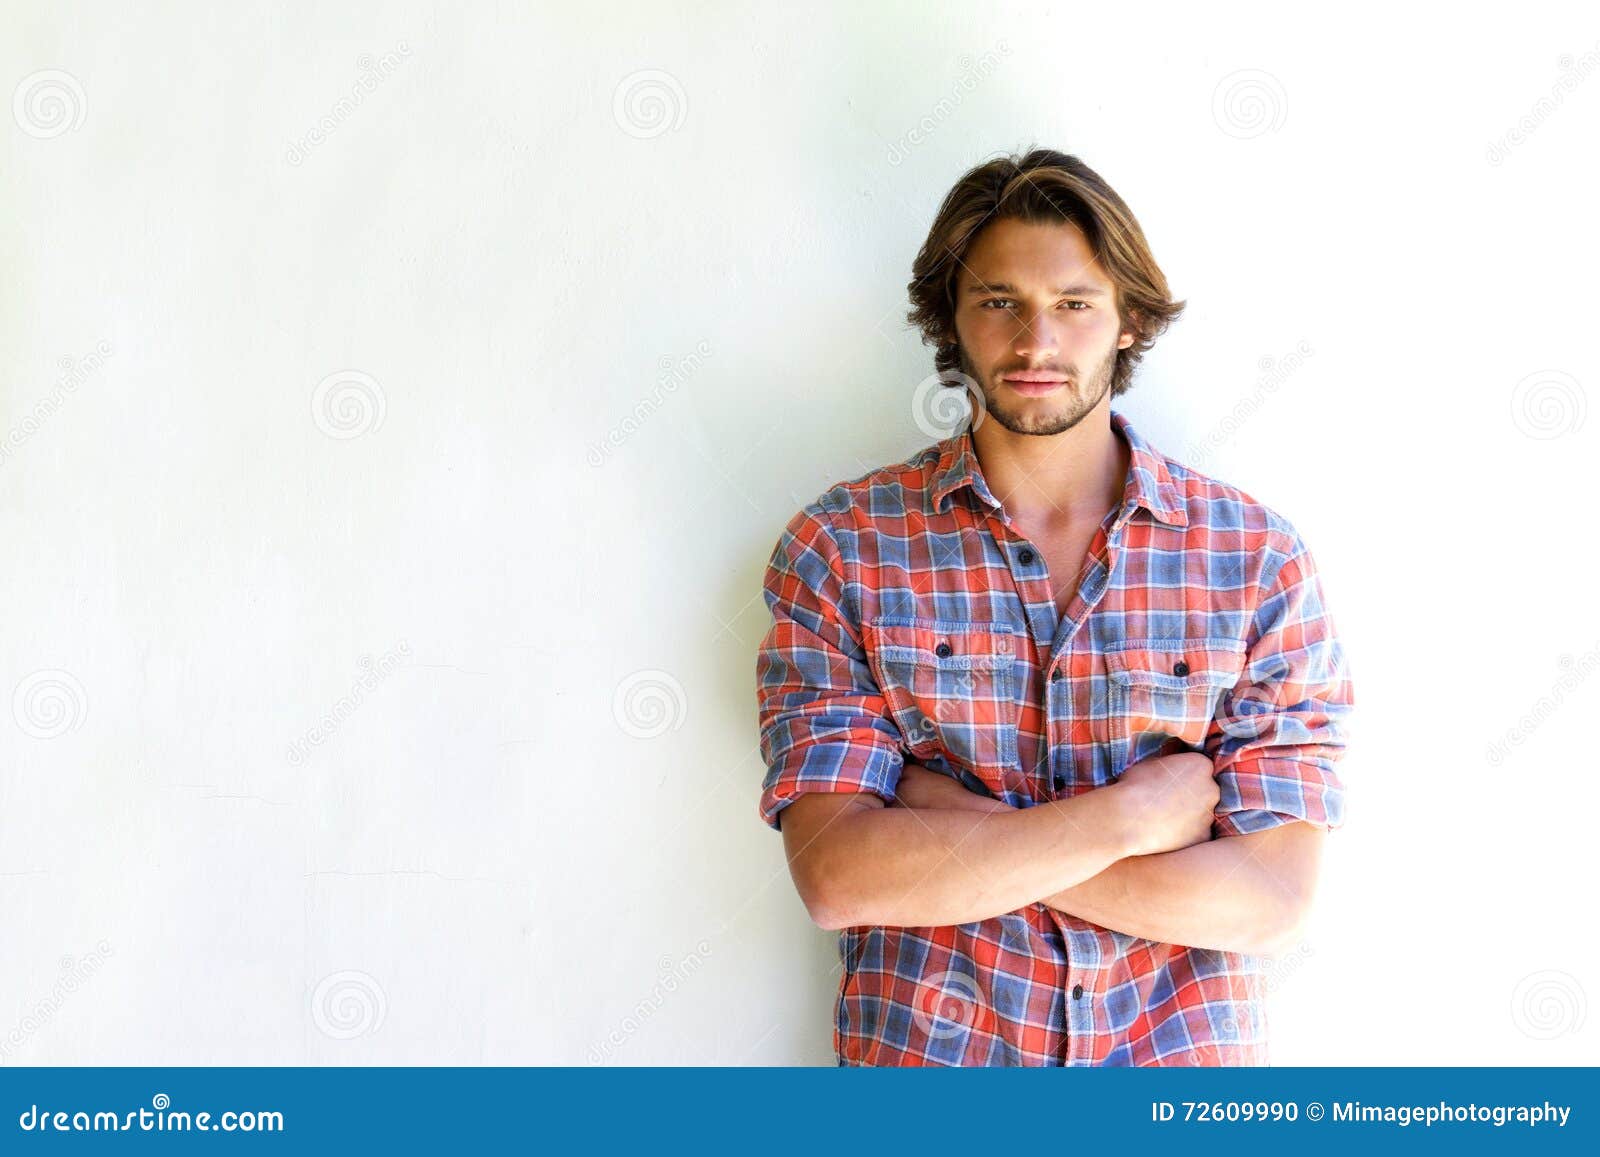 serious young man with arms crossed on white background